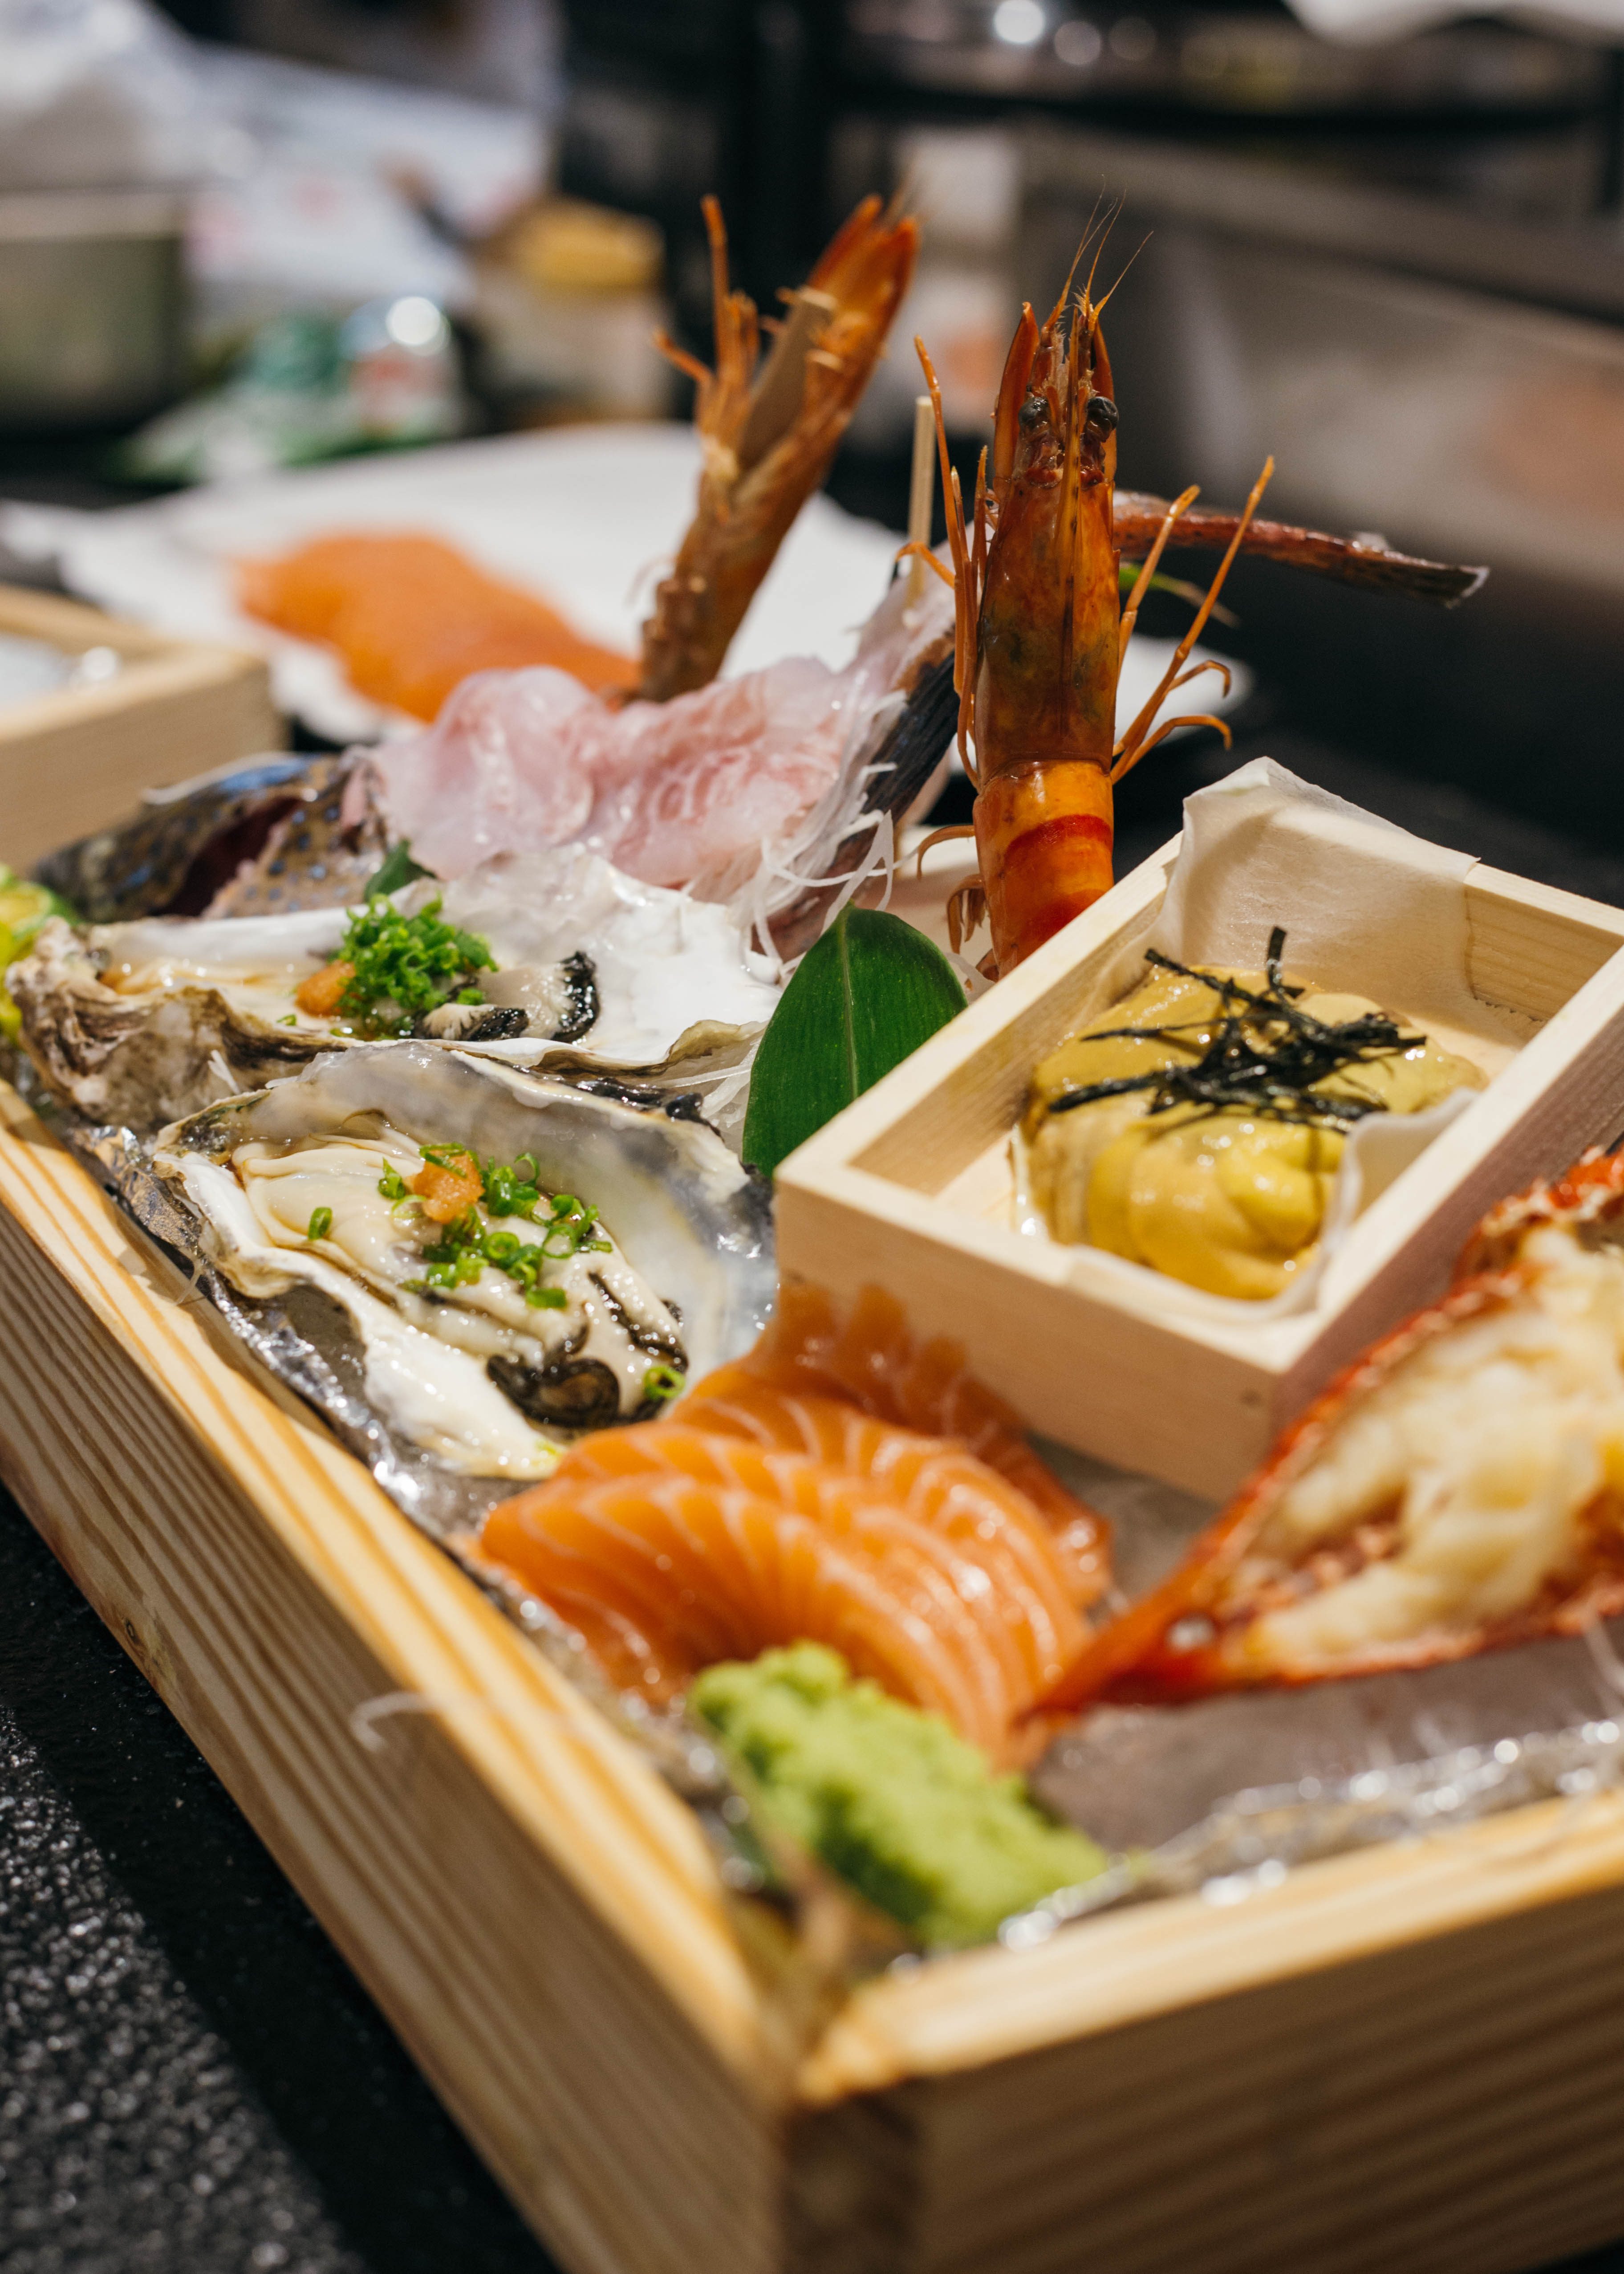 A platter of assorted seafood made upon request: lobster, salmon, uni (sea urchin), oyster, prawns, and groupers 